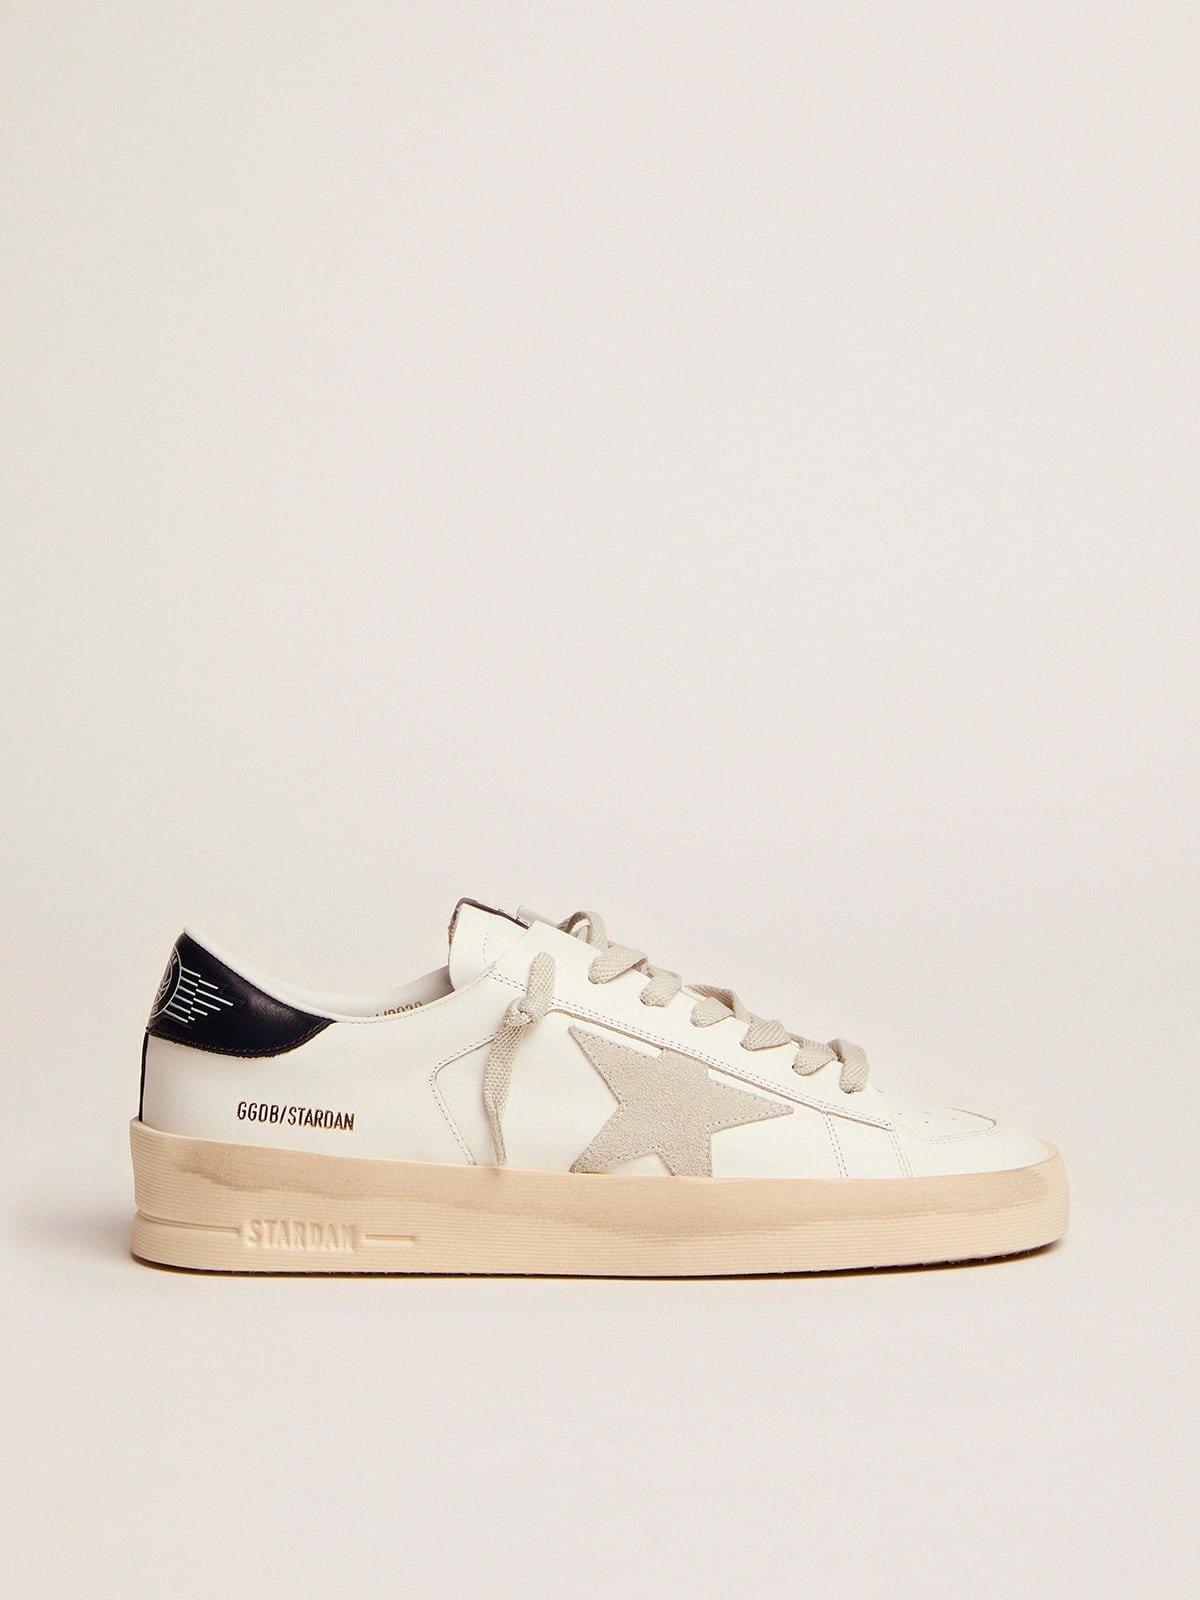 Trainers, shoes and clothes for men, women & kids | Golden Goose